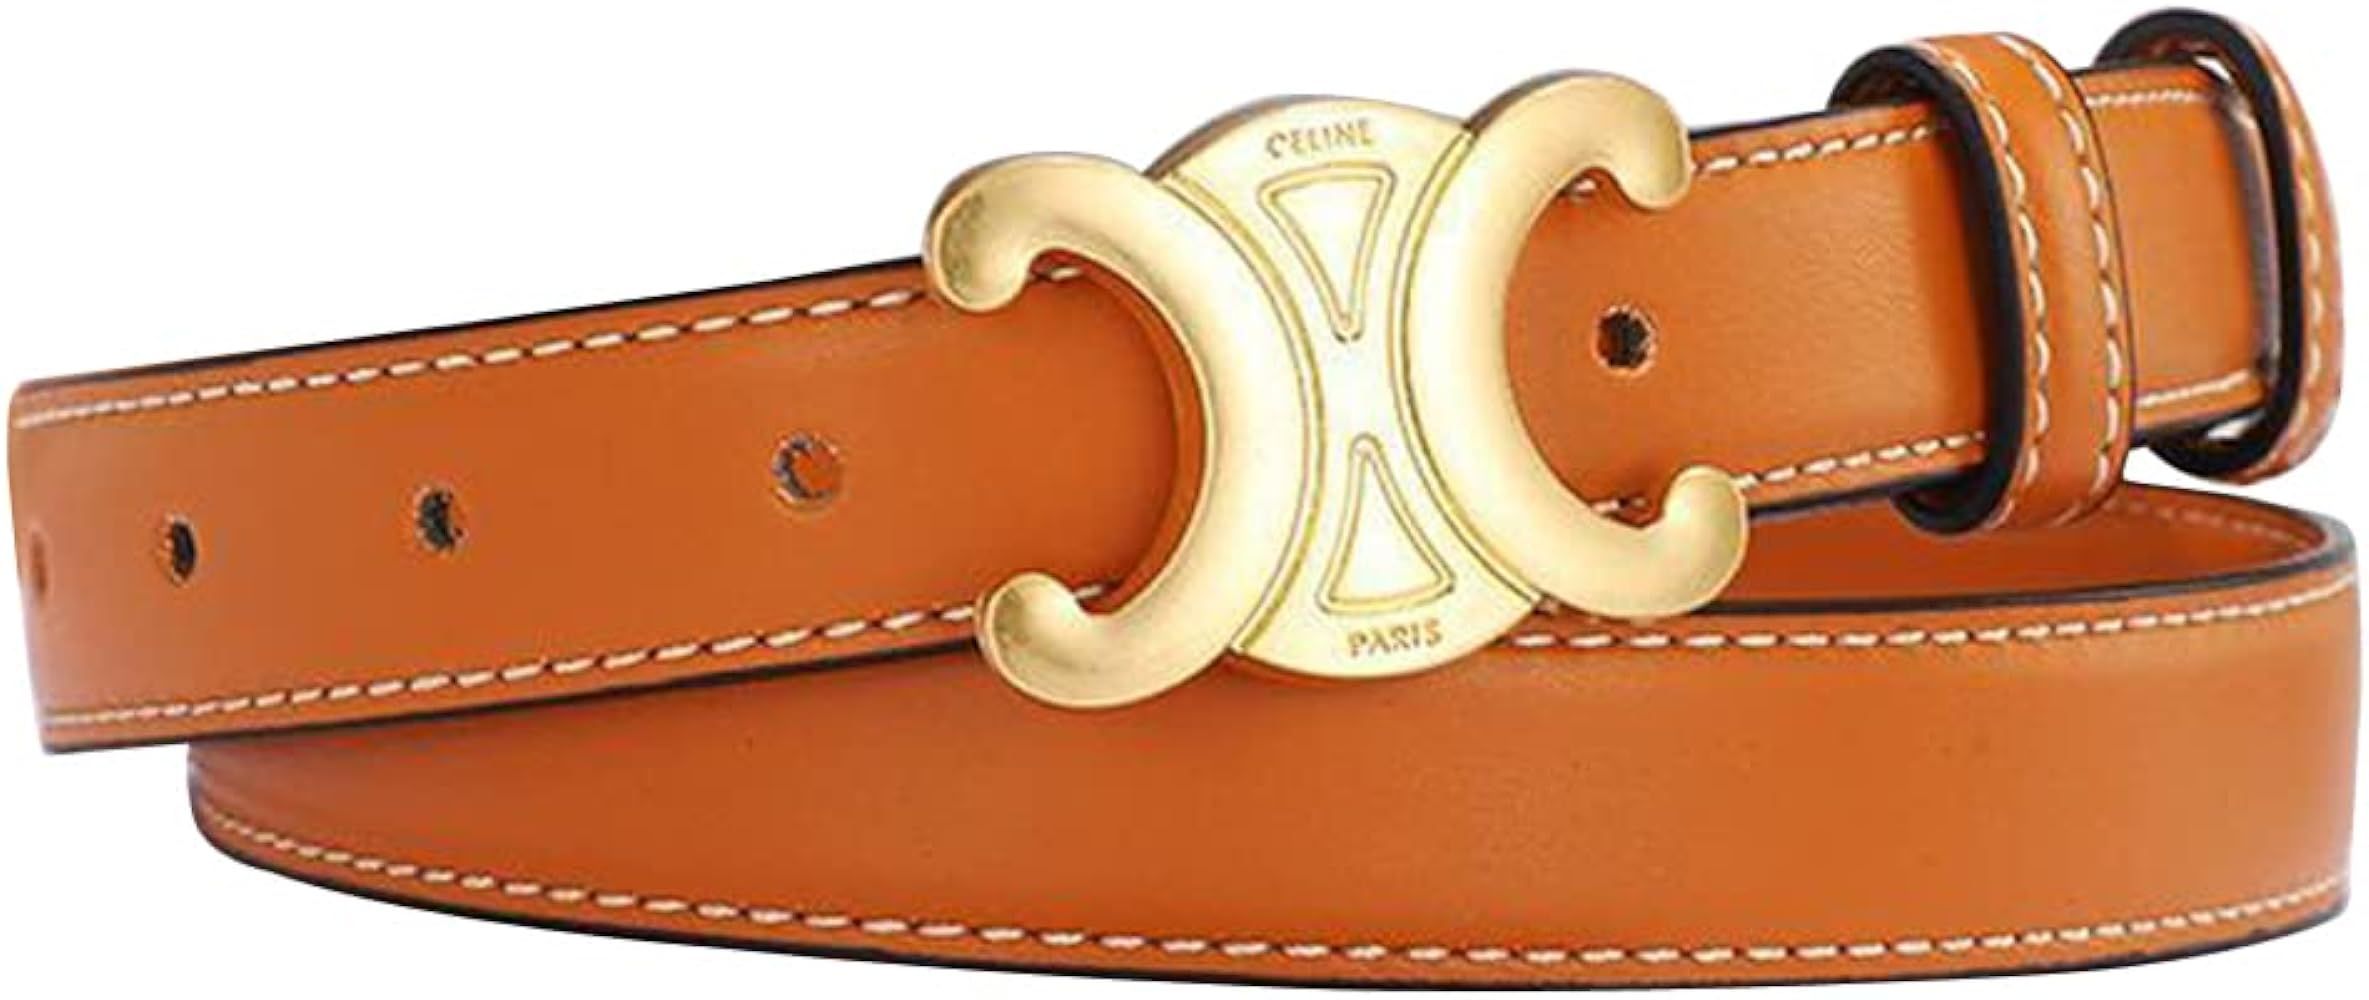 Ladies fashion belt Alloy buckle belt can be matched with jeans belt width 2.4cm | Amazon (US)